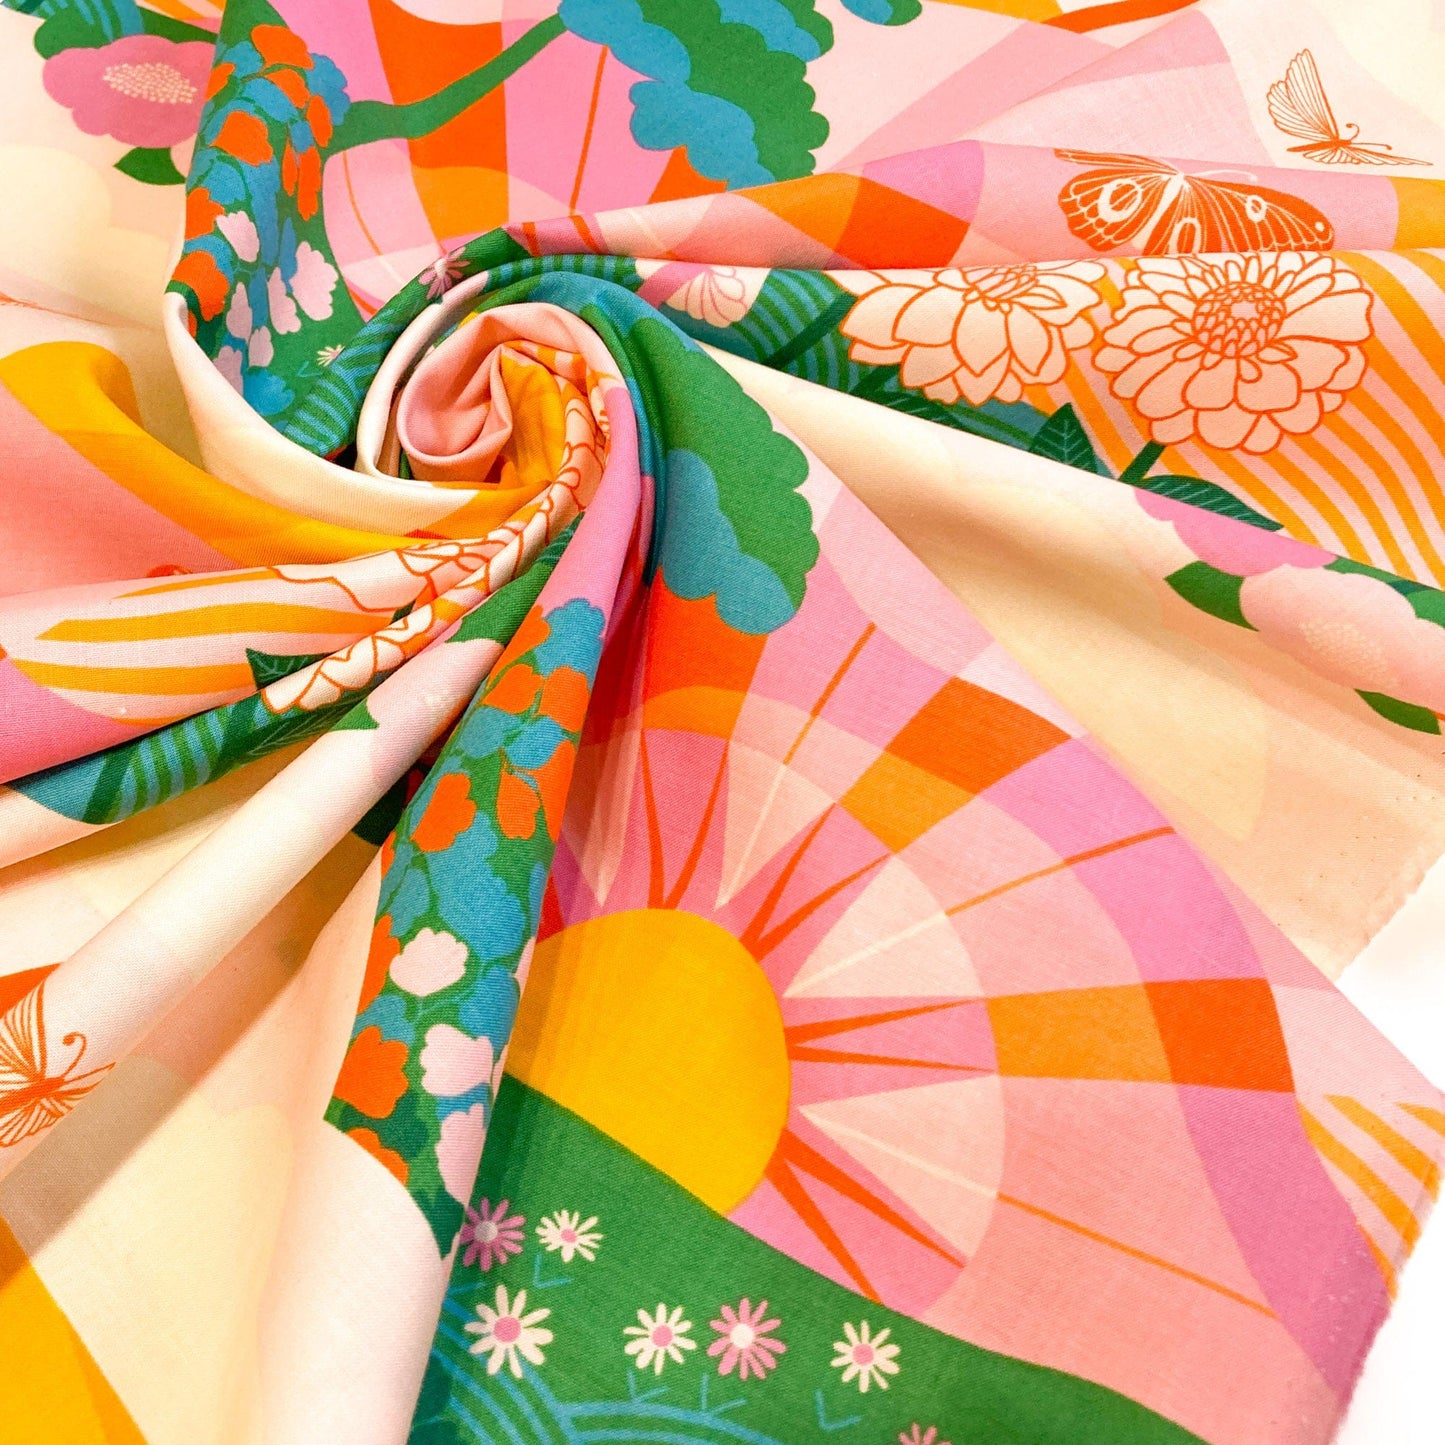 Ruby Star Society 'Rise and Shine' Quilting Cotton 'Hello Sunshine' in June